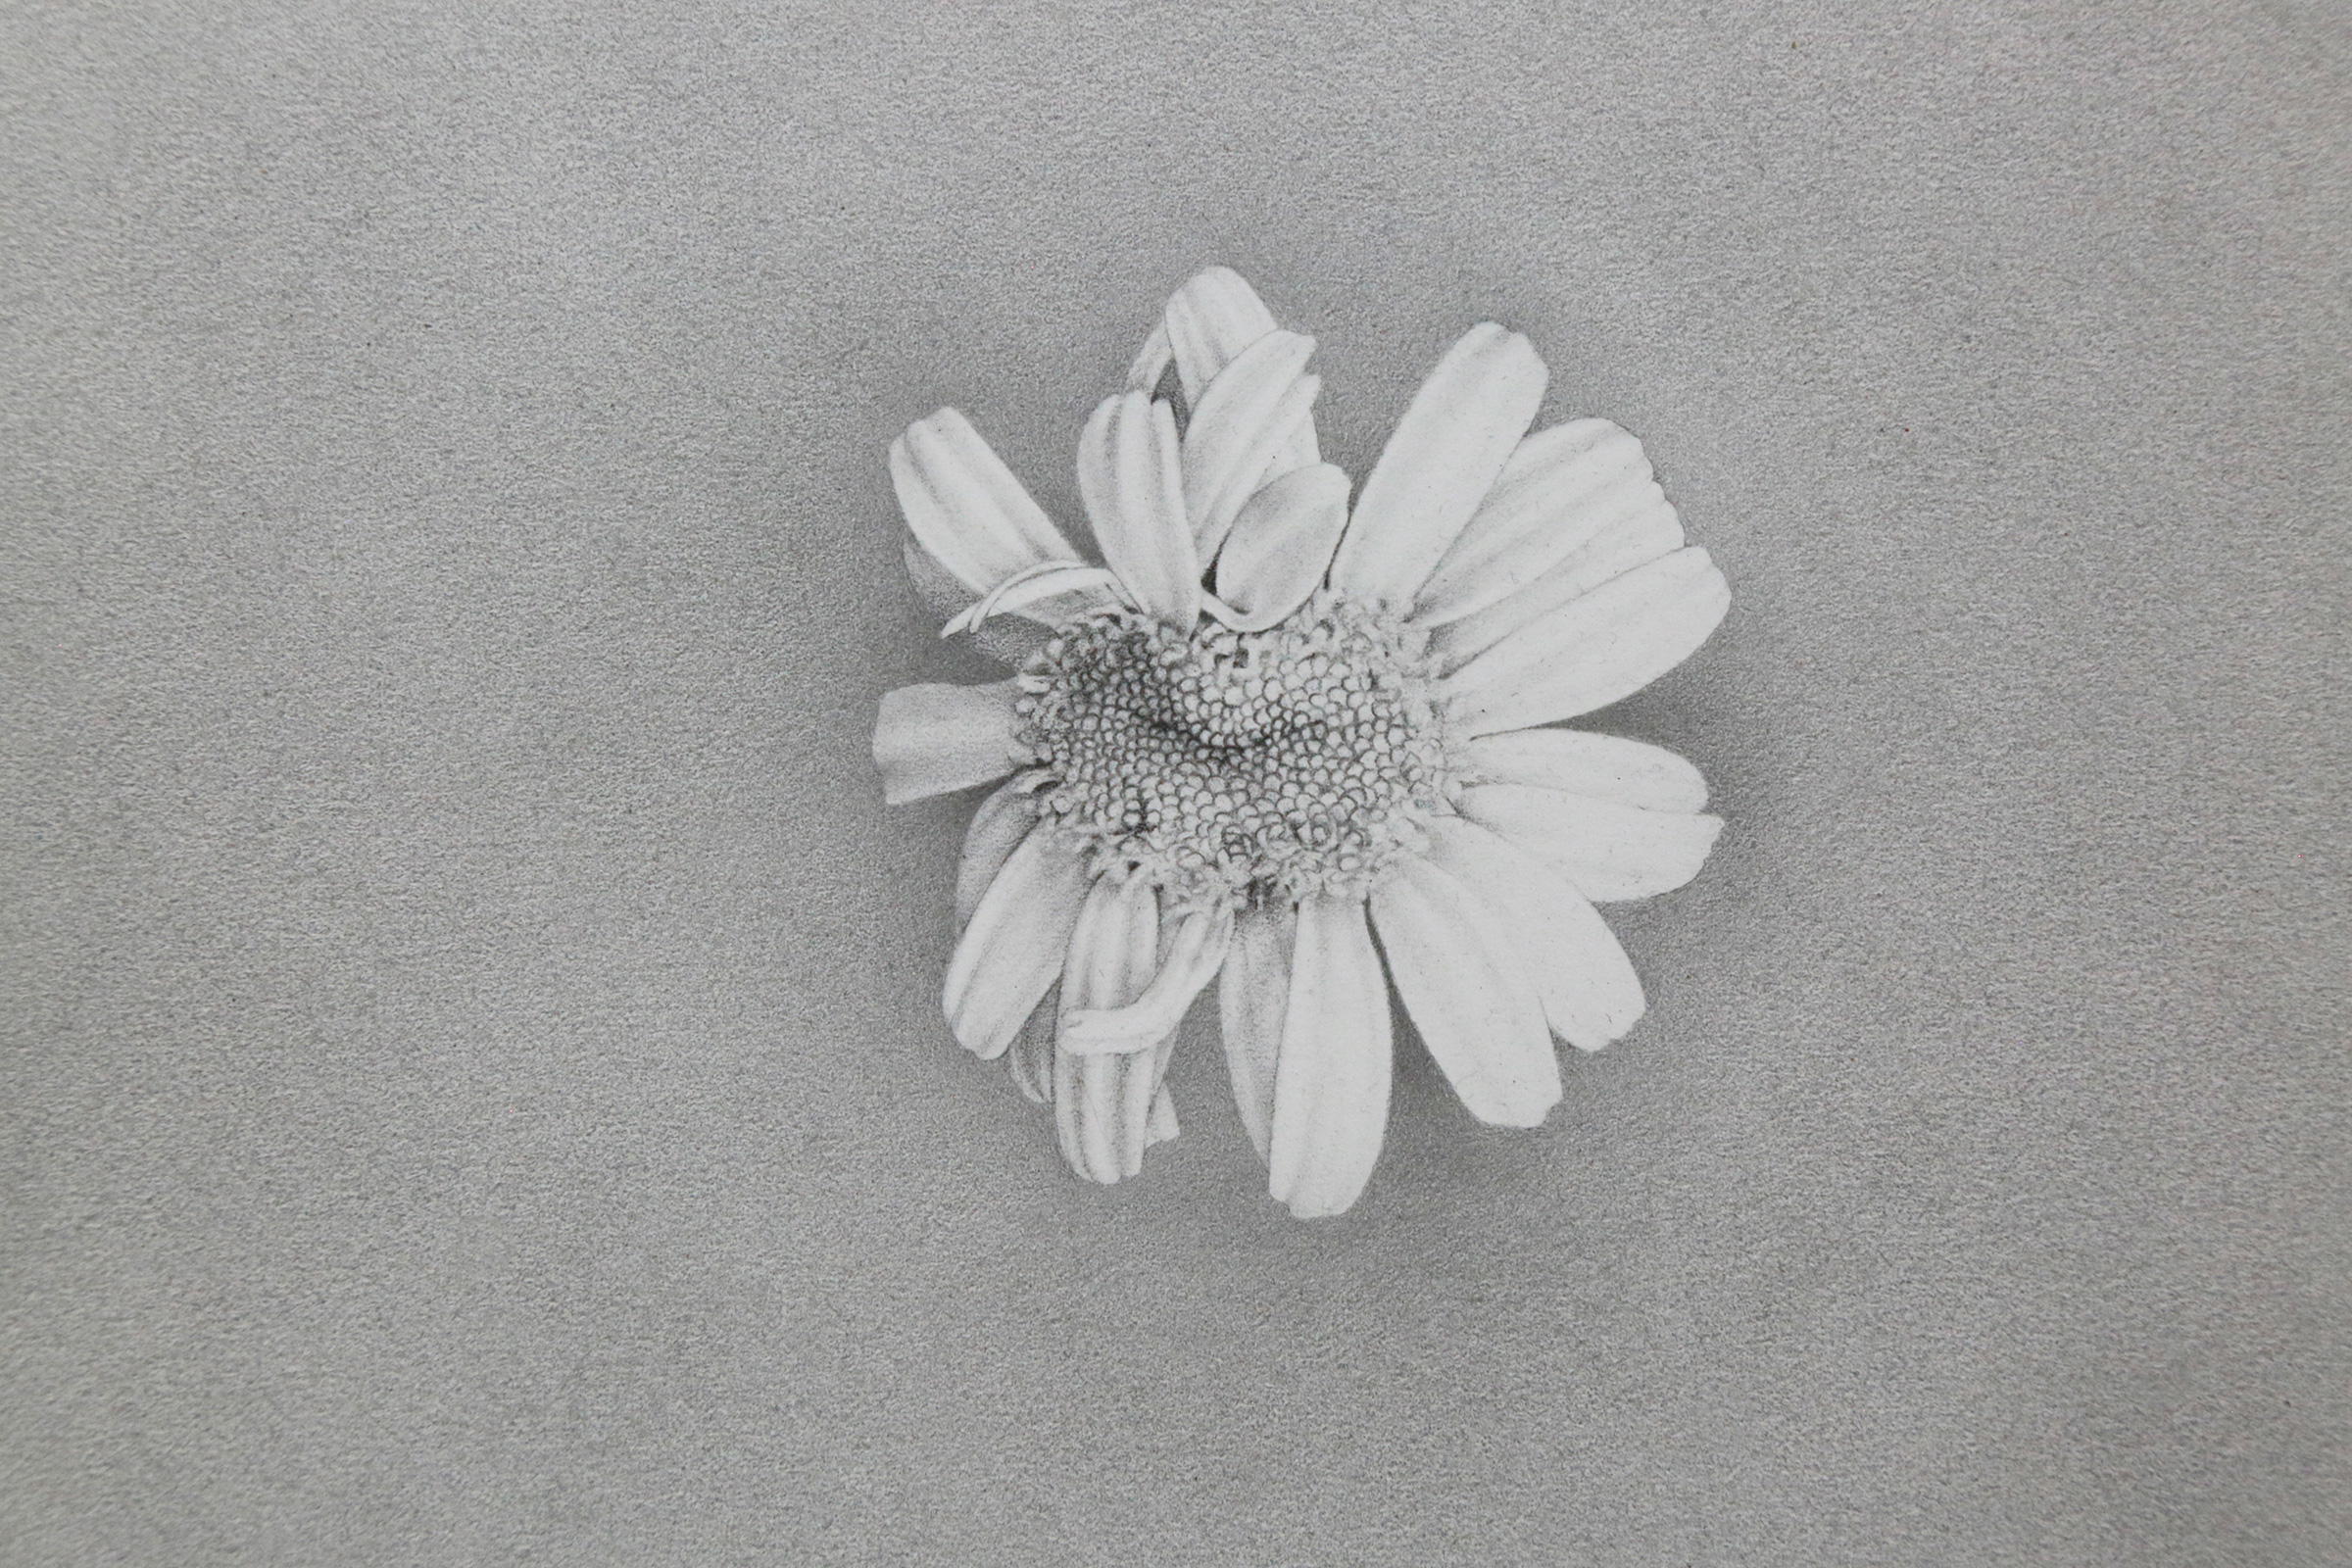 This is a graphite drawing of a daisy flower that looks stranger than the previous one; its center is stretched out more than the last flower, so that it looks like a smile. The blossom is centered in the middle of the drawing, surrounded by a matte, gray background also drawn in graphite.